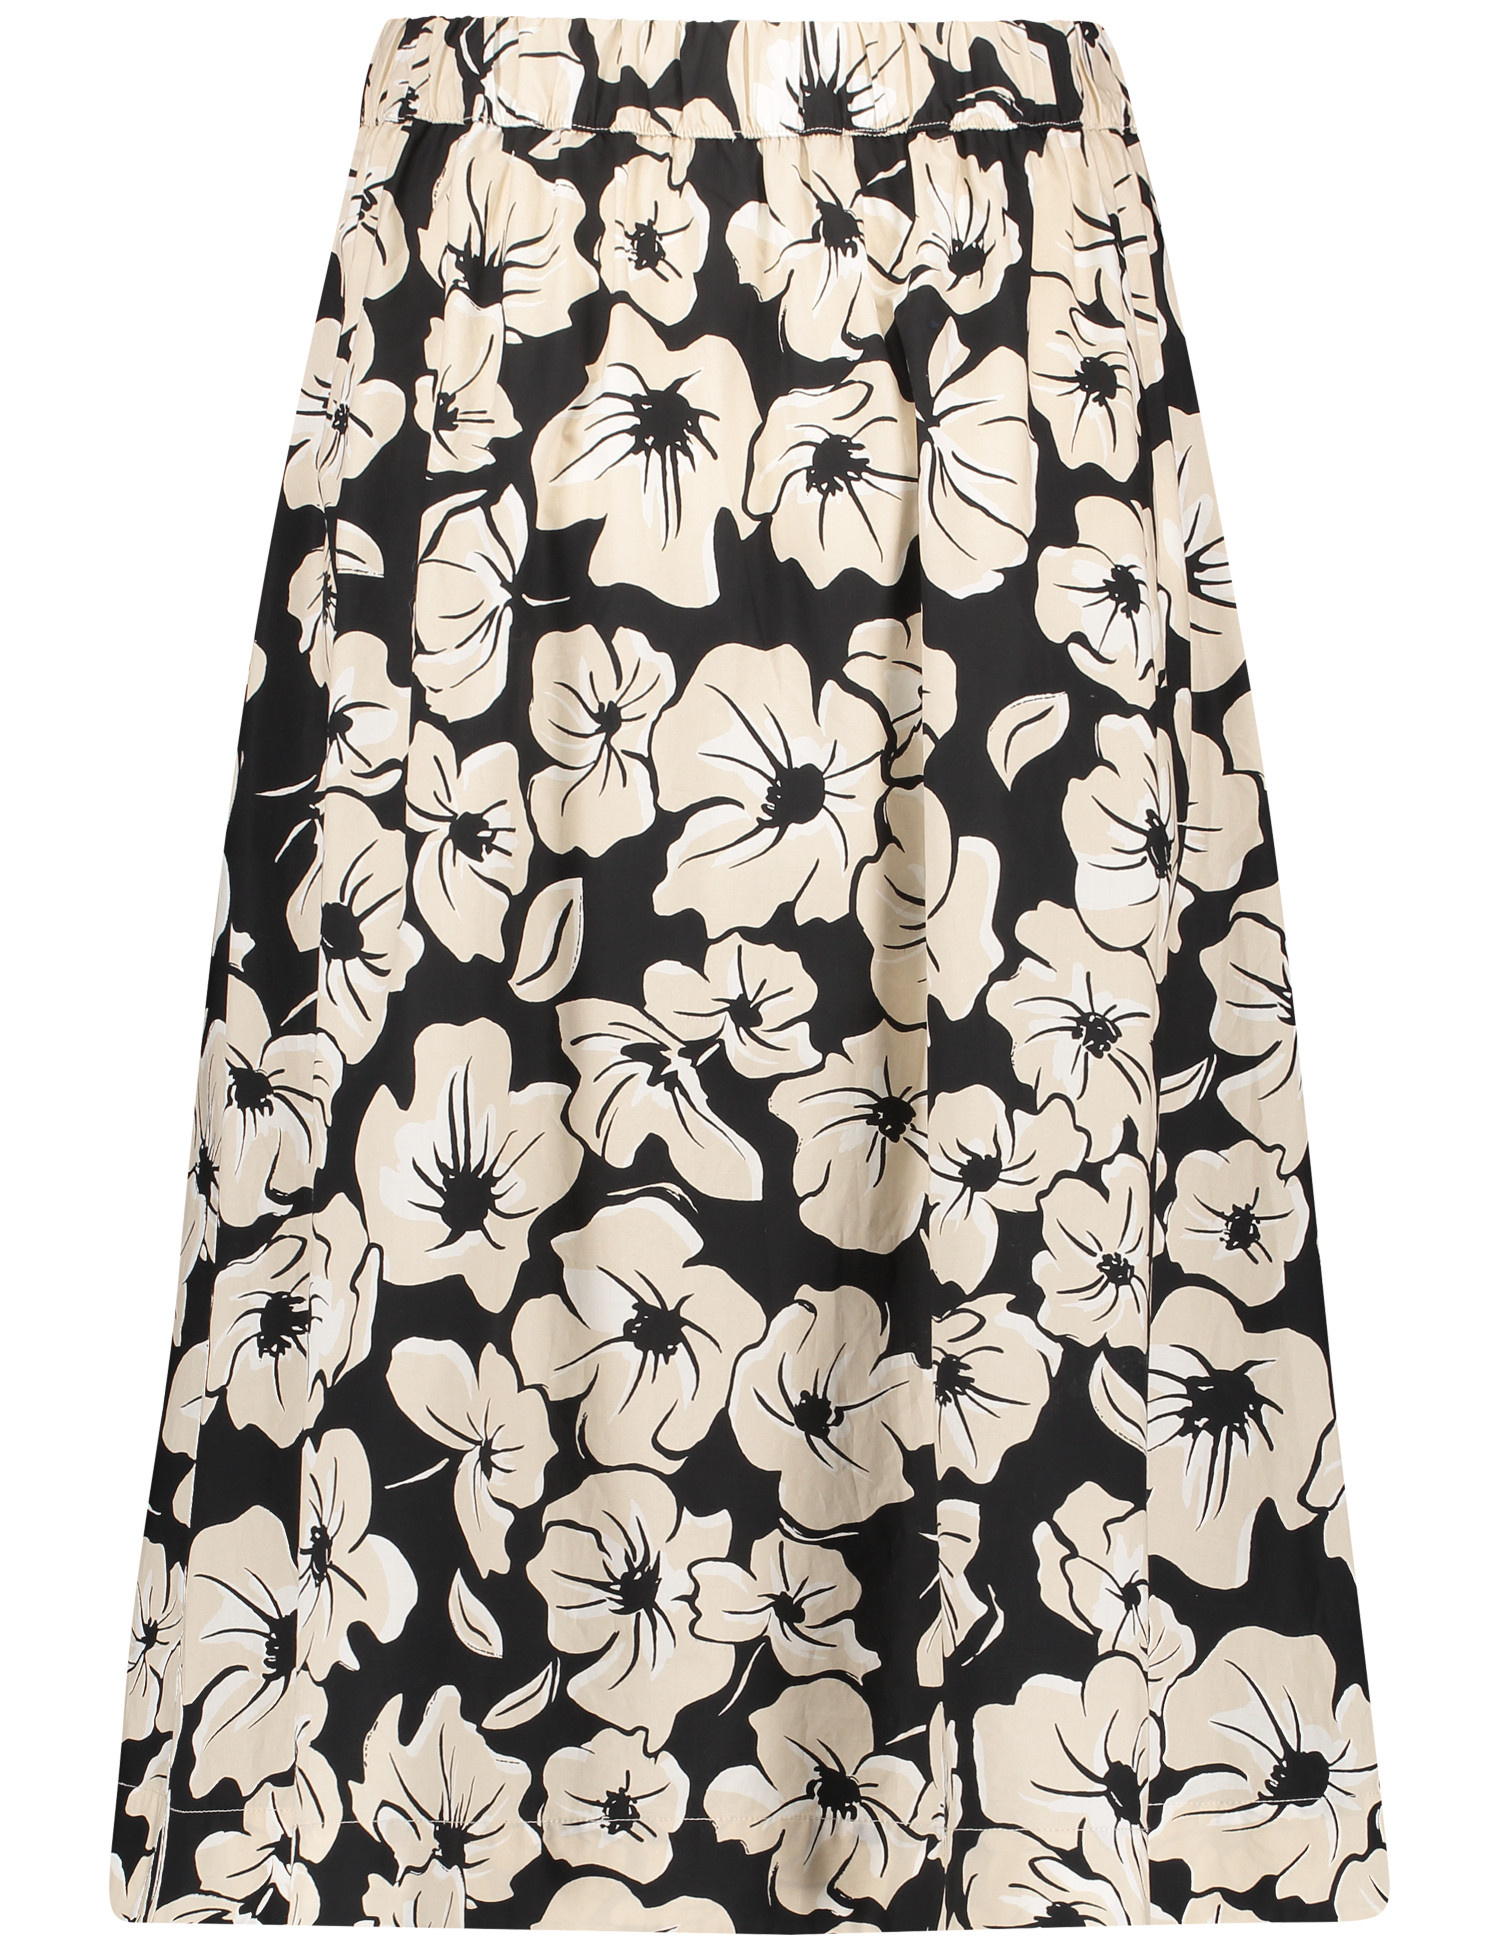 Midi Skirt With A Floral Pattern_310015-31511_1098_03